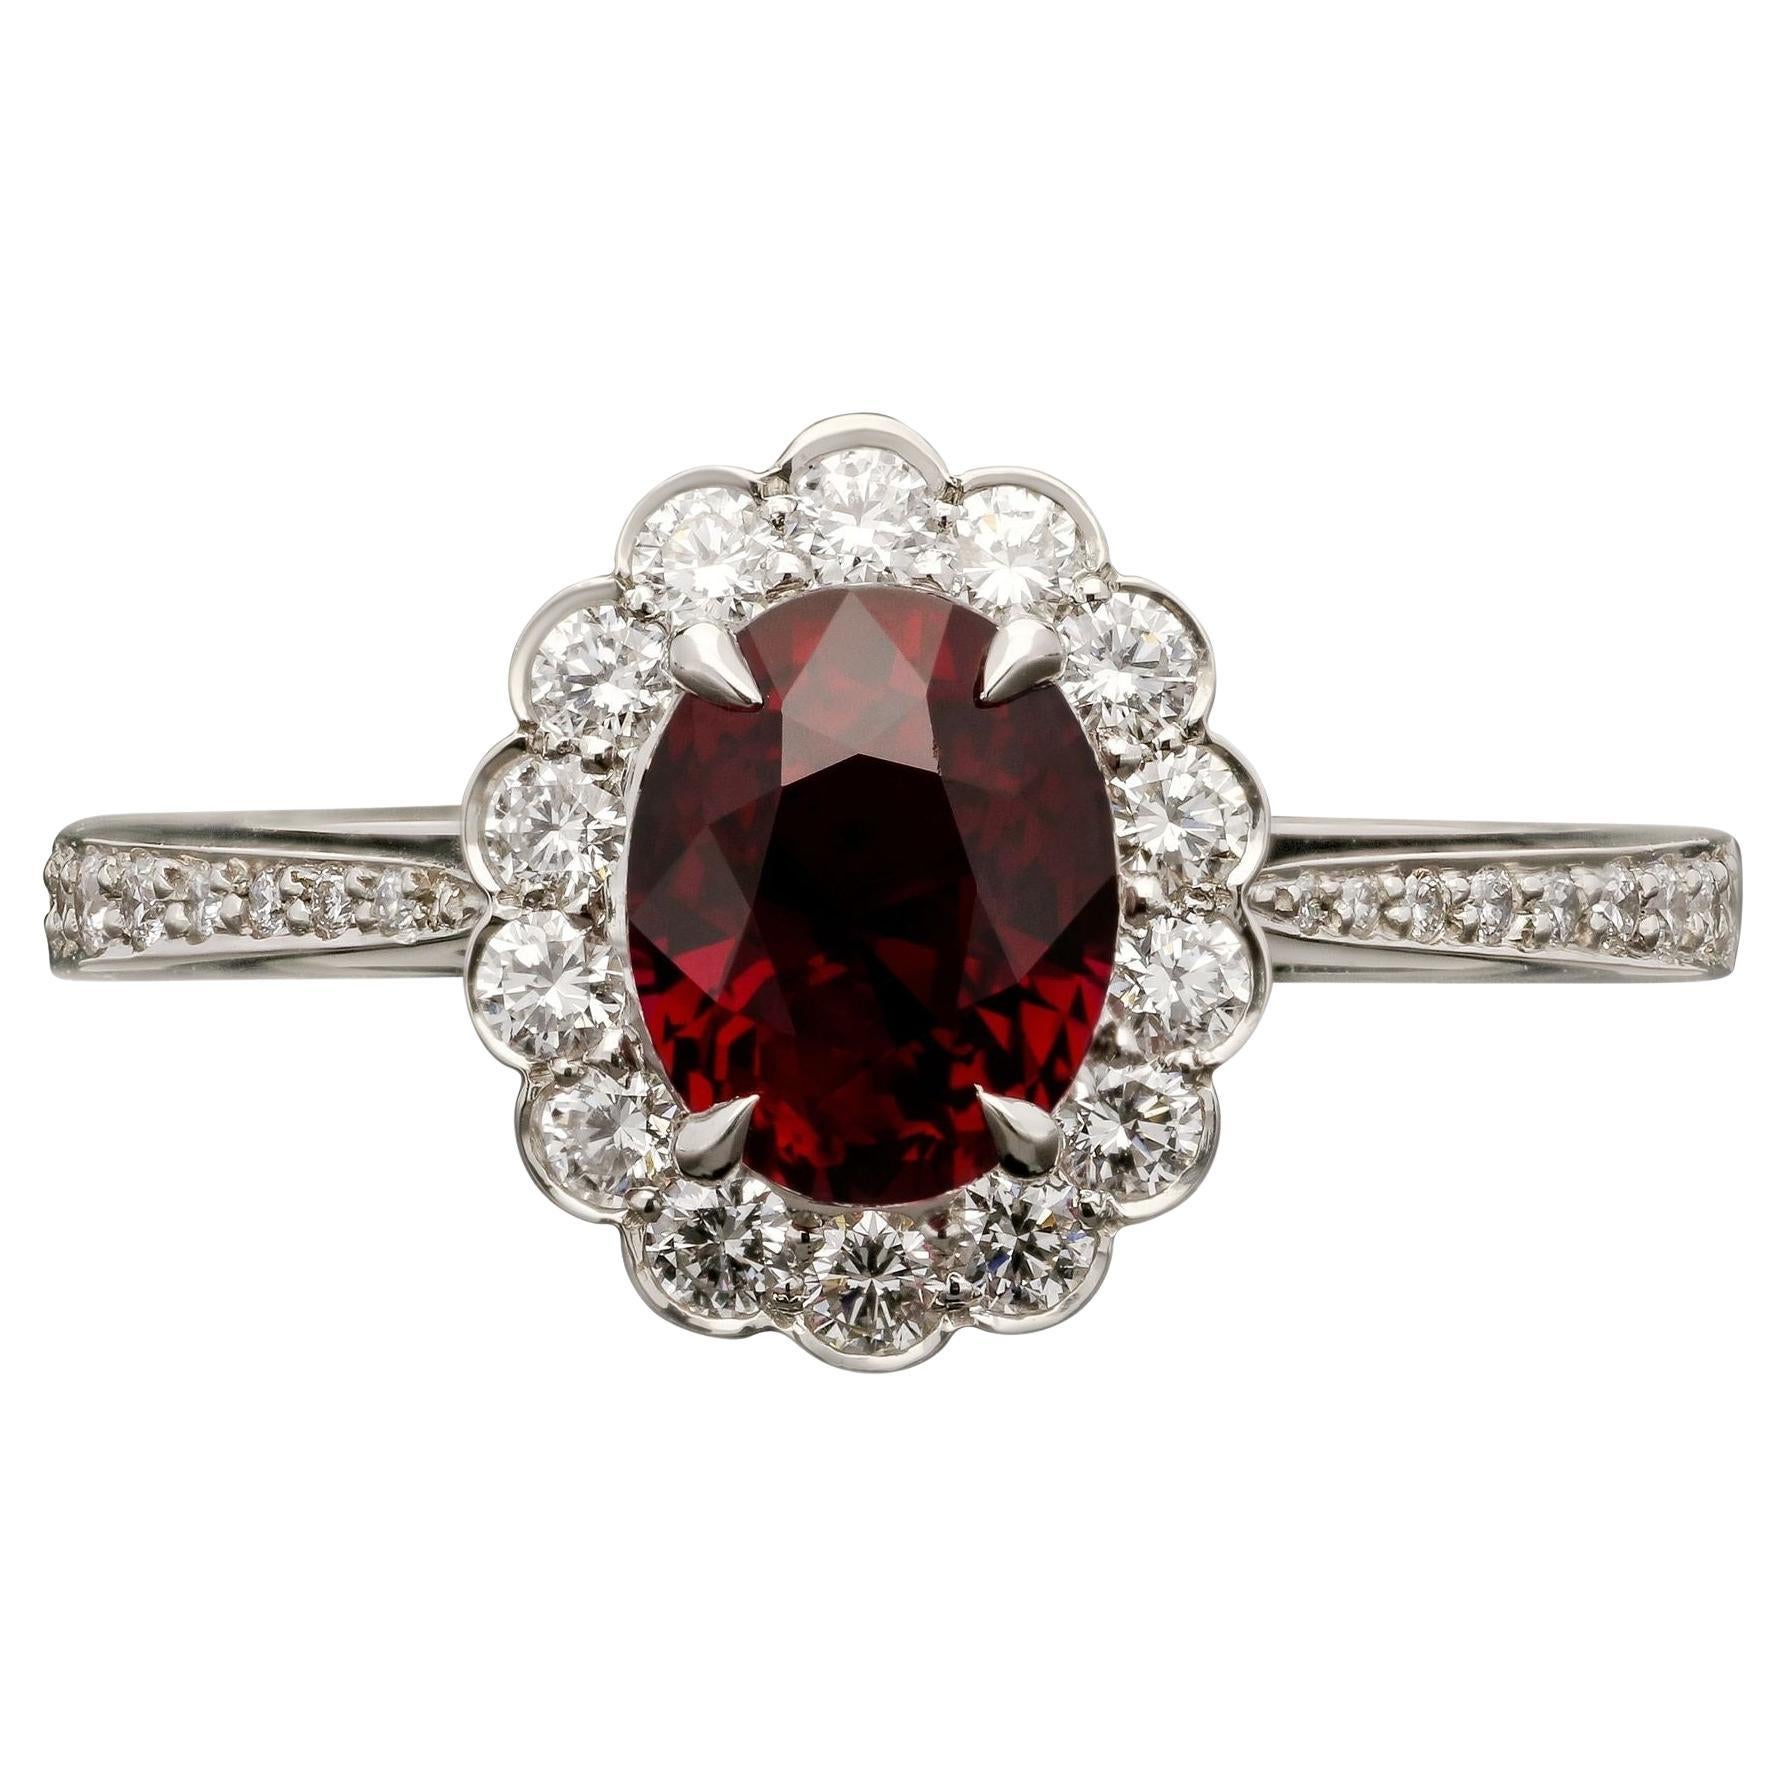 Hancocks Classic 1.57ct Oval Ruby and Round Brilliant Diamond Cluster Ring